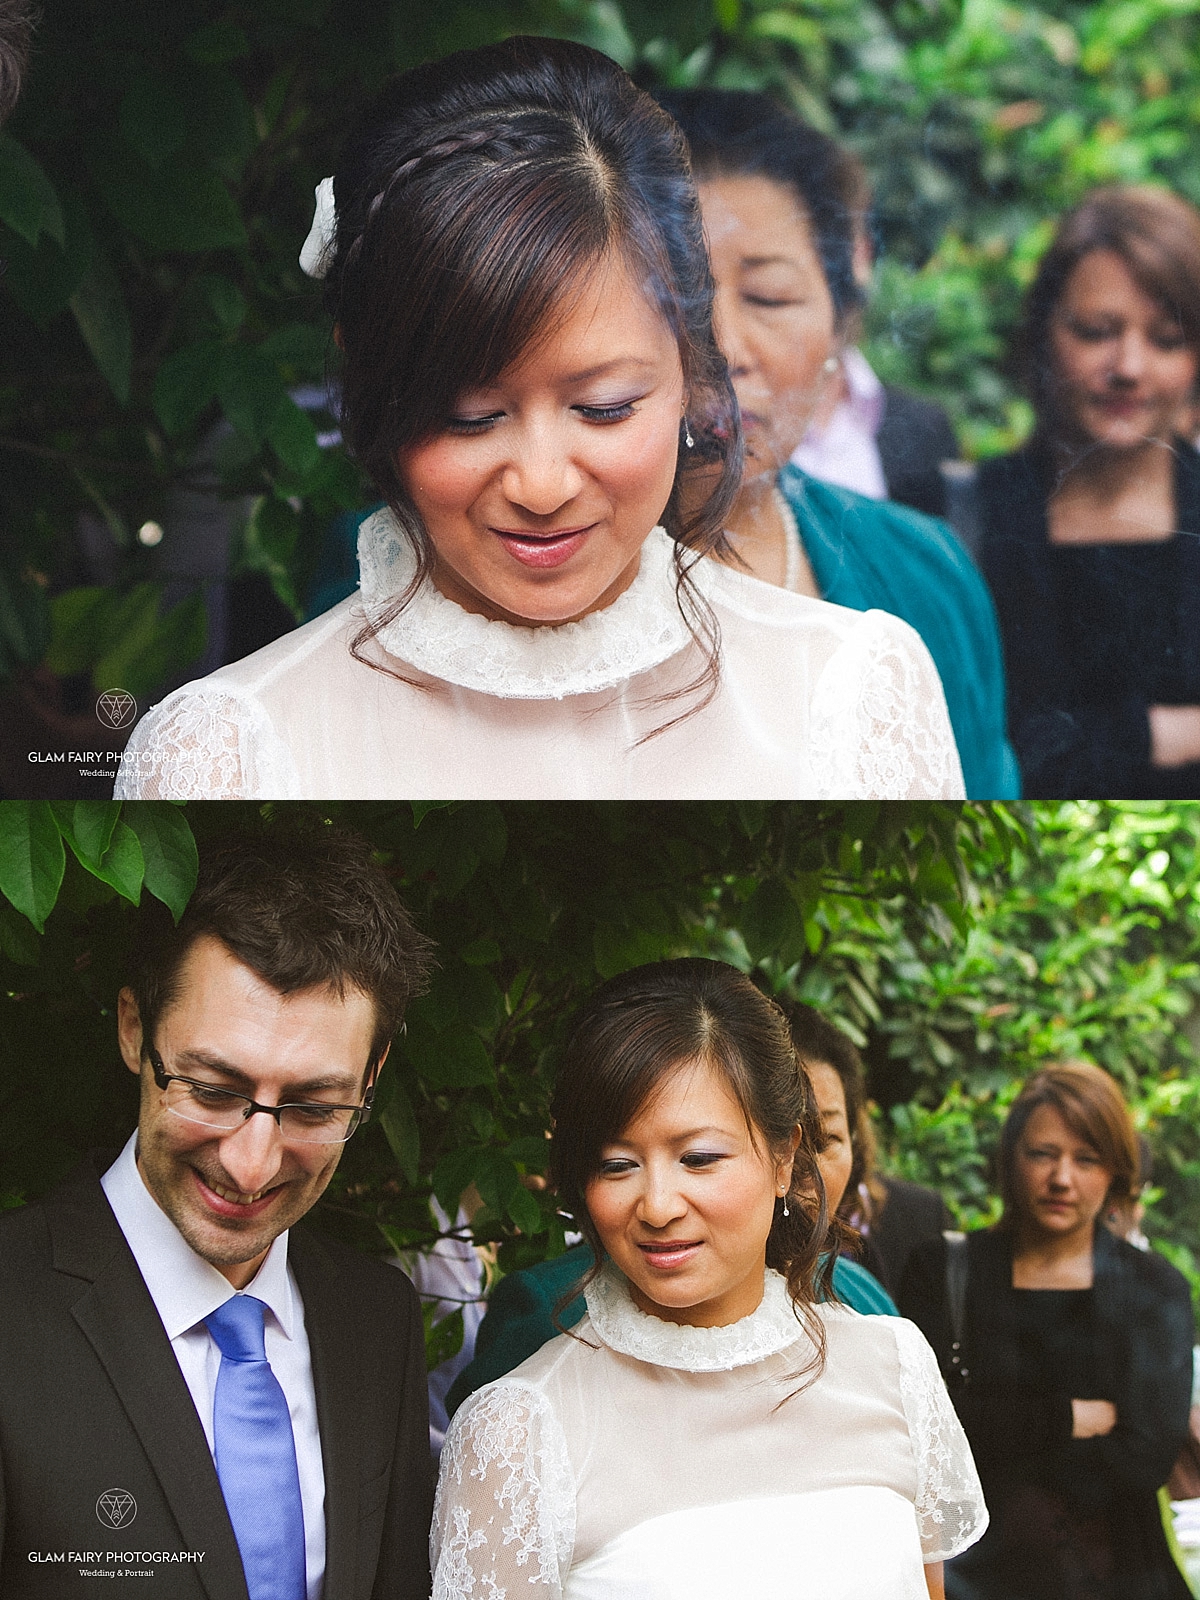 GlamFairyPhotography-GlamFairyPhotography-mariage-franco-chinois-ymeuil_0005